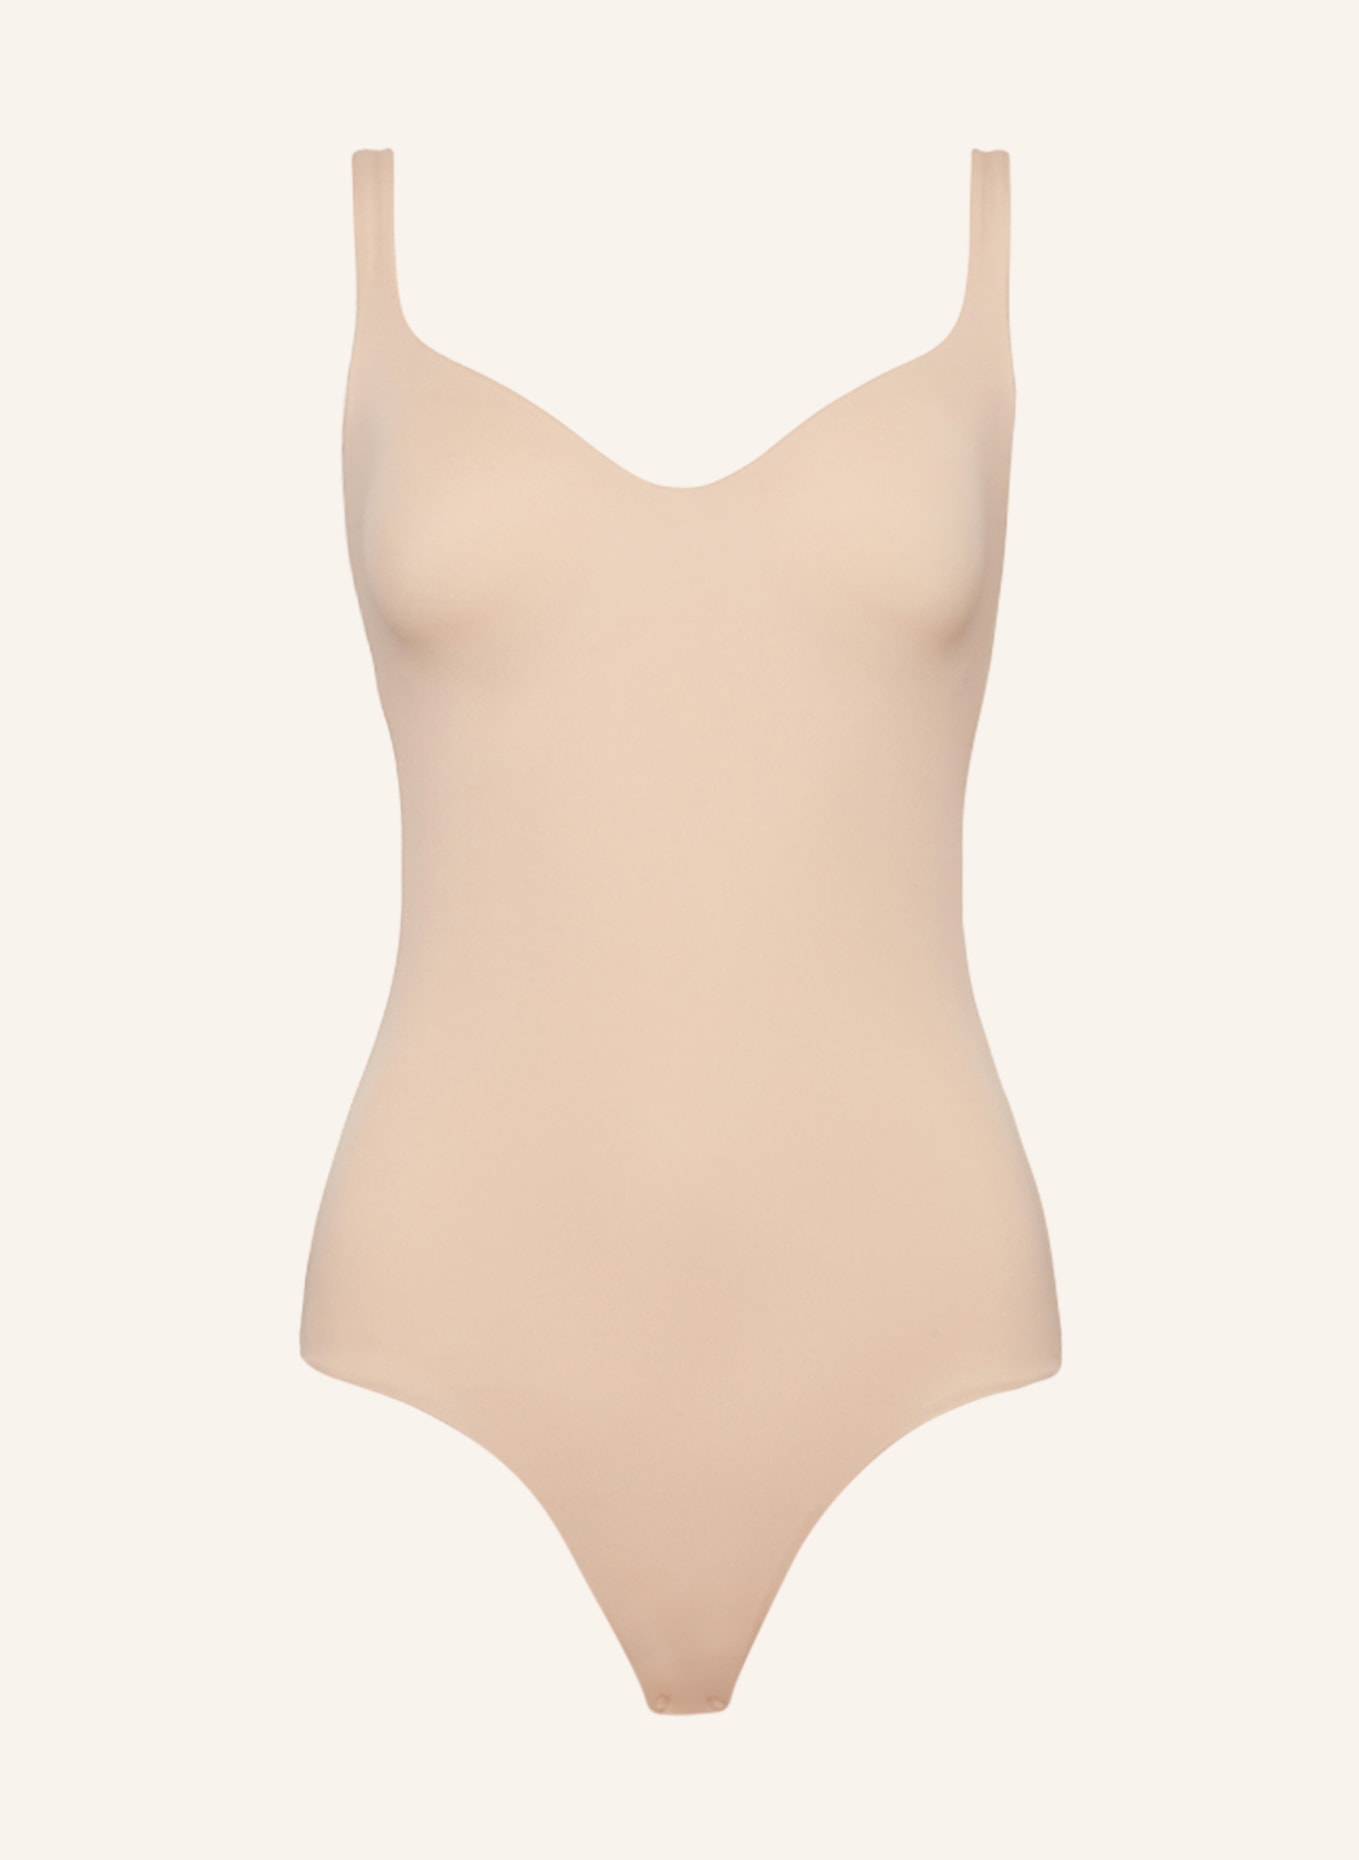 Wolford Shaping body MAT DE LUXE in nude